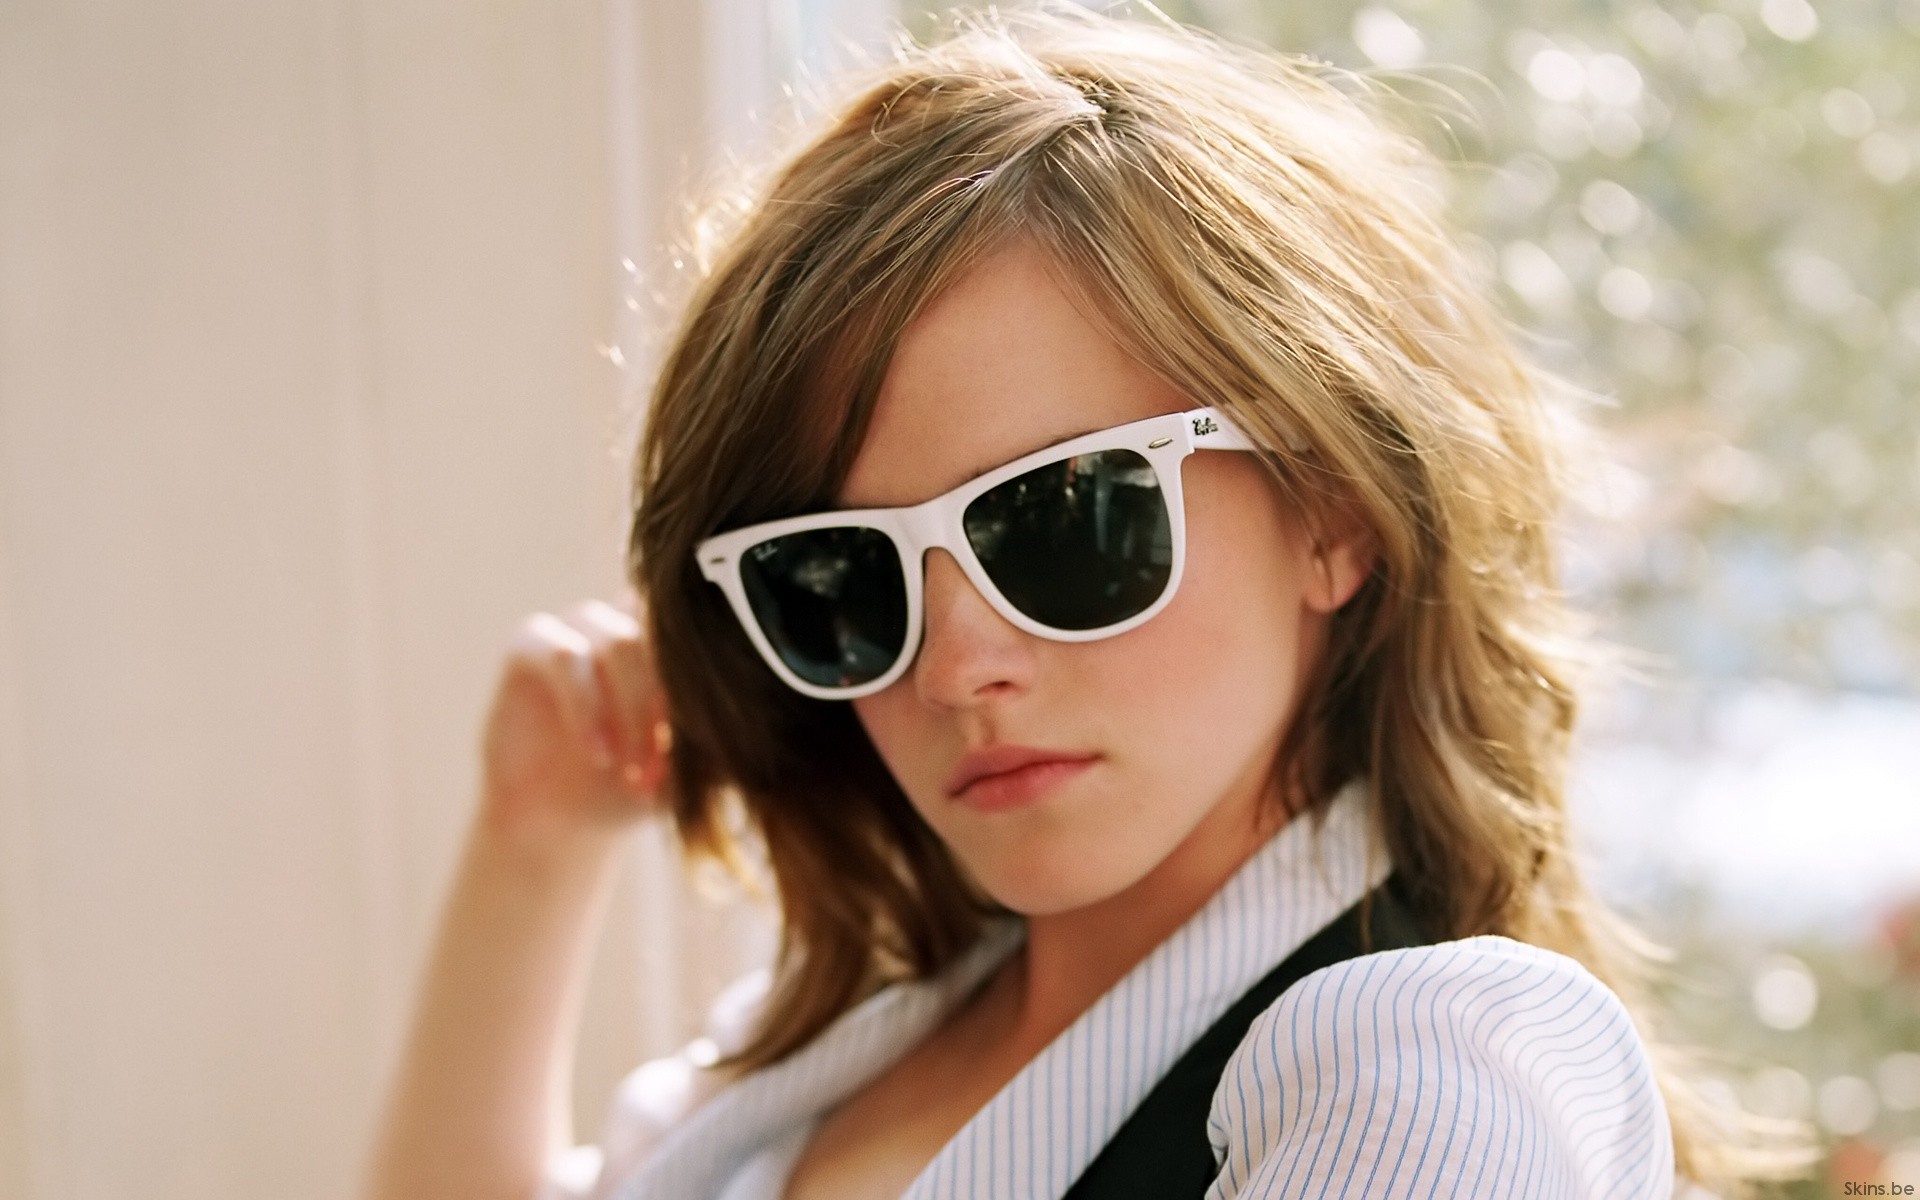 People 1920x1200 Emma Watson blonde face women with glasses actress celebrity Ray-Ban women with shades sunglasses women indoors indoors women White glasses closeup watermarked